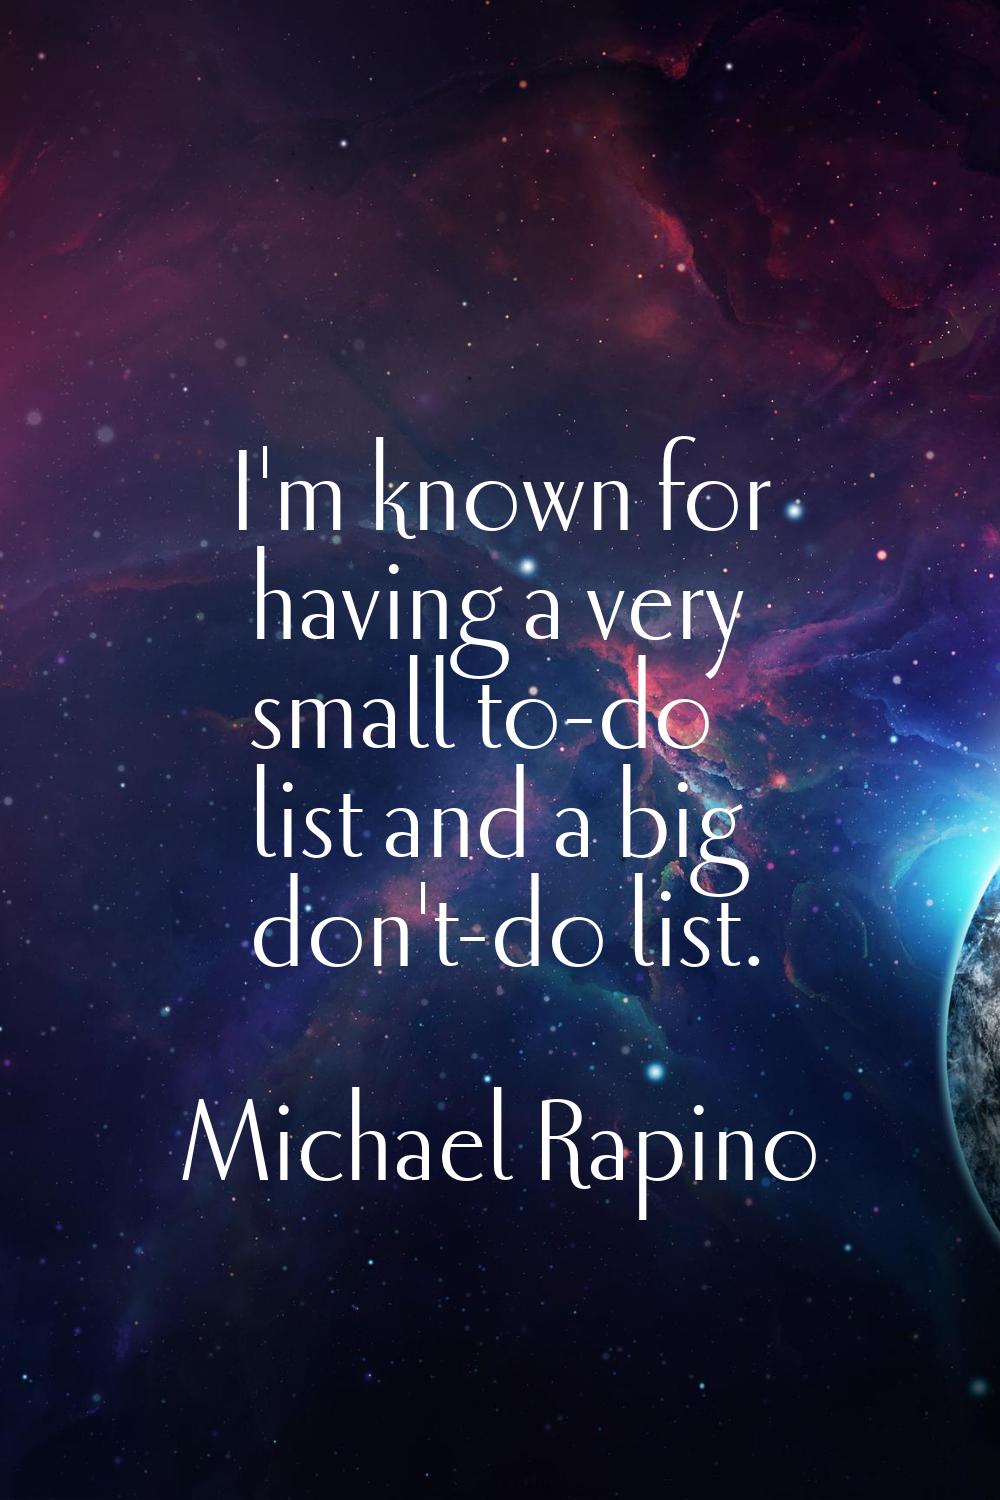 I'm known for having a very small to-do list and a big don't-do list.